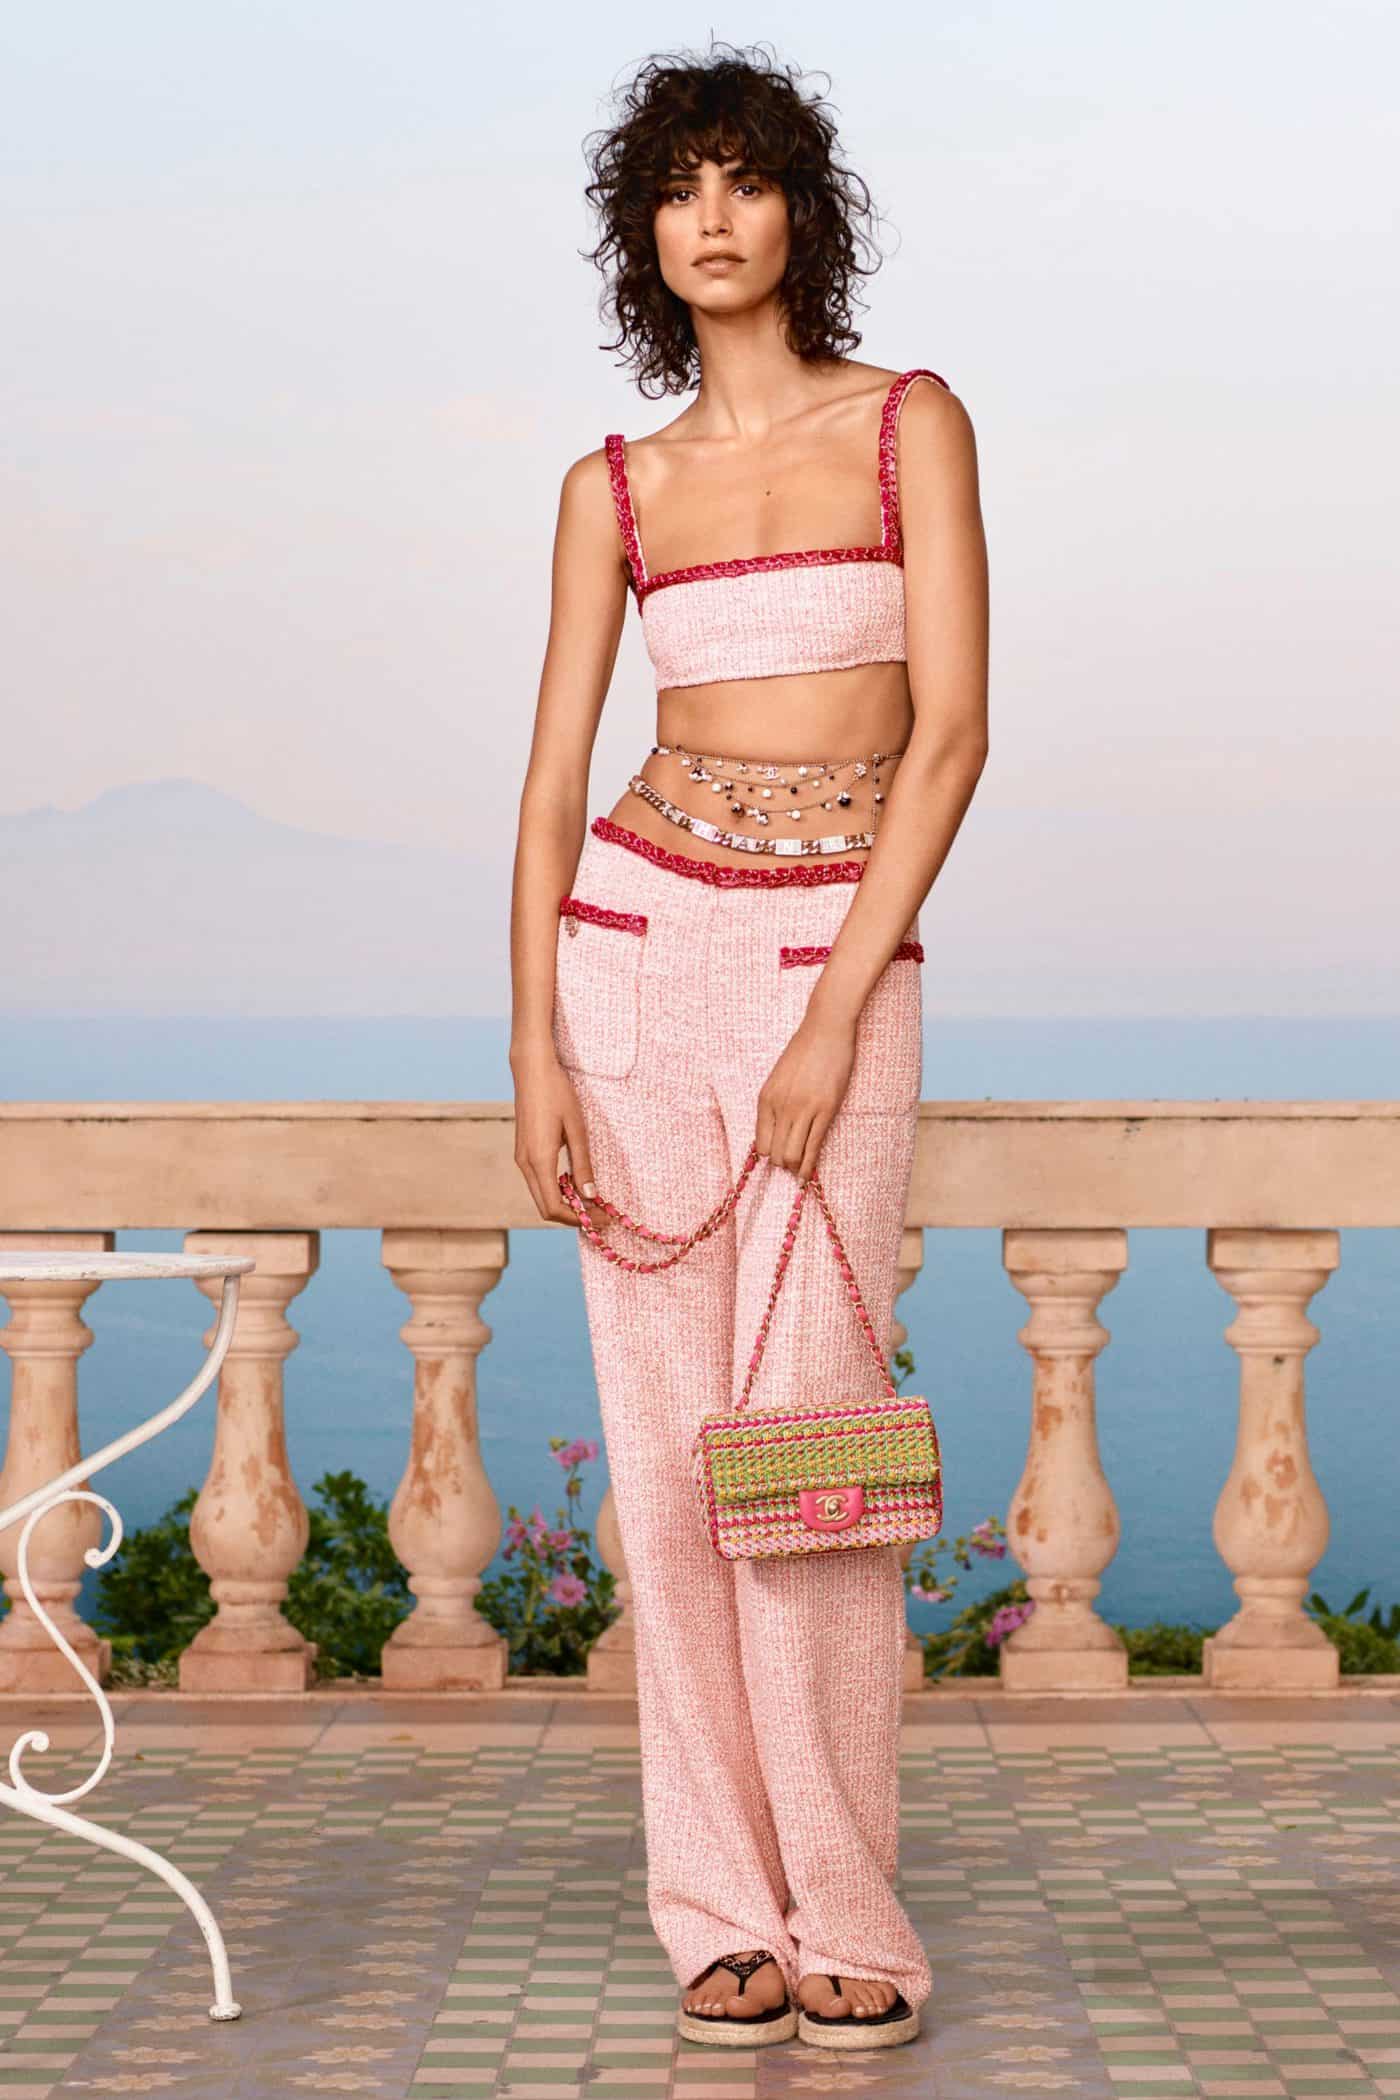 Lily-Rose Depp Chanel Cruise 2021 Ad Campaign - theFashionSpot